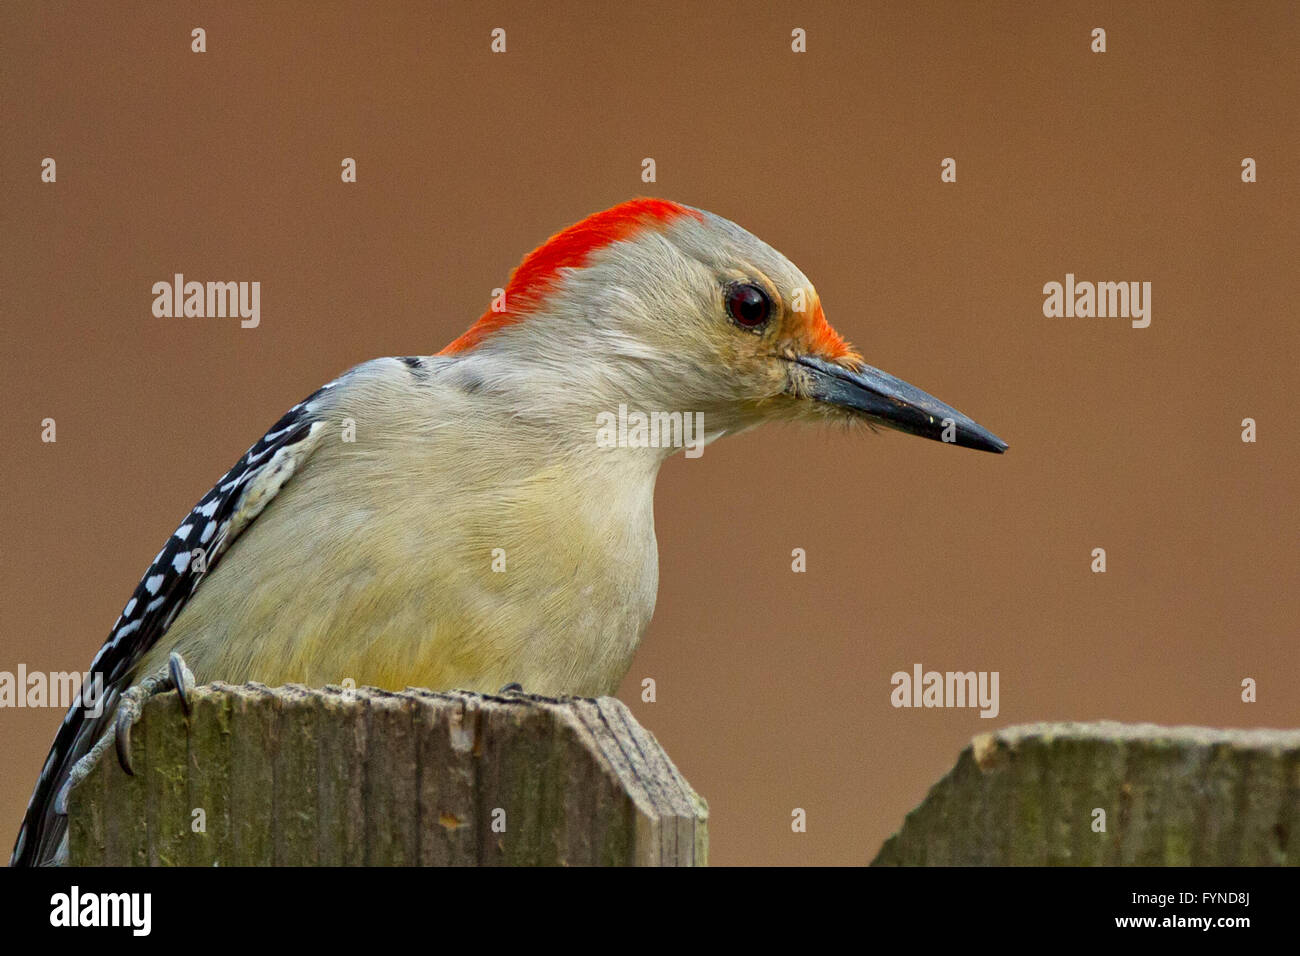 red bellied woodpecker perched on a fence Stock Photo